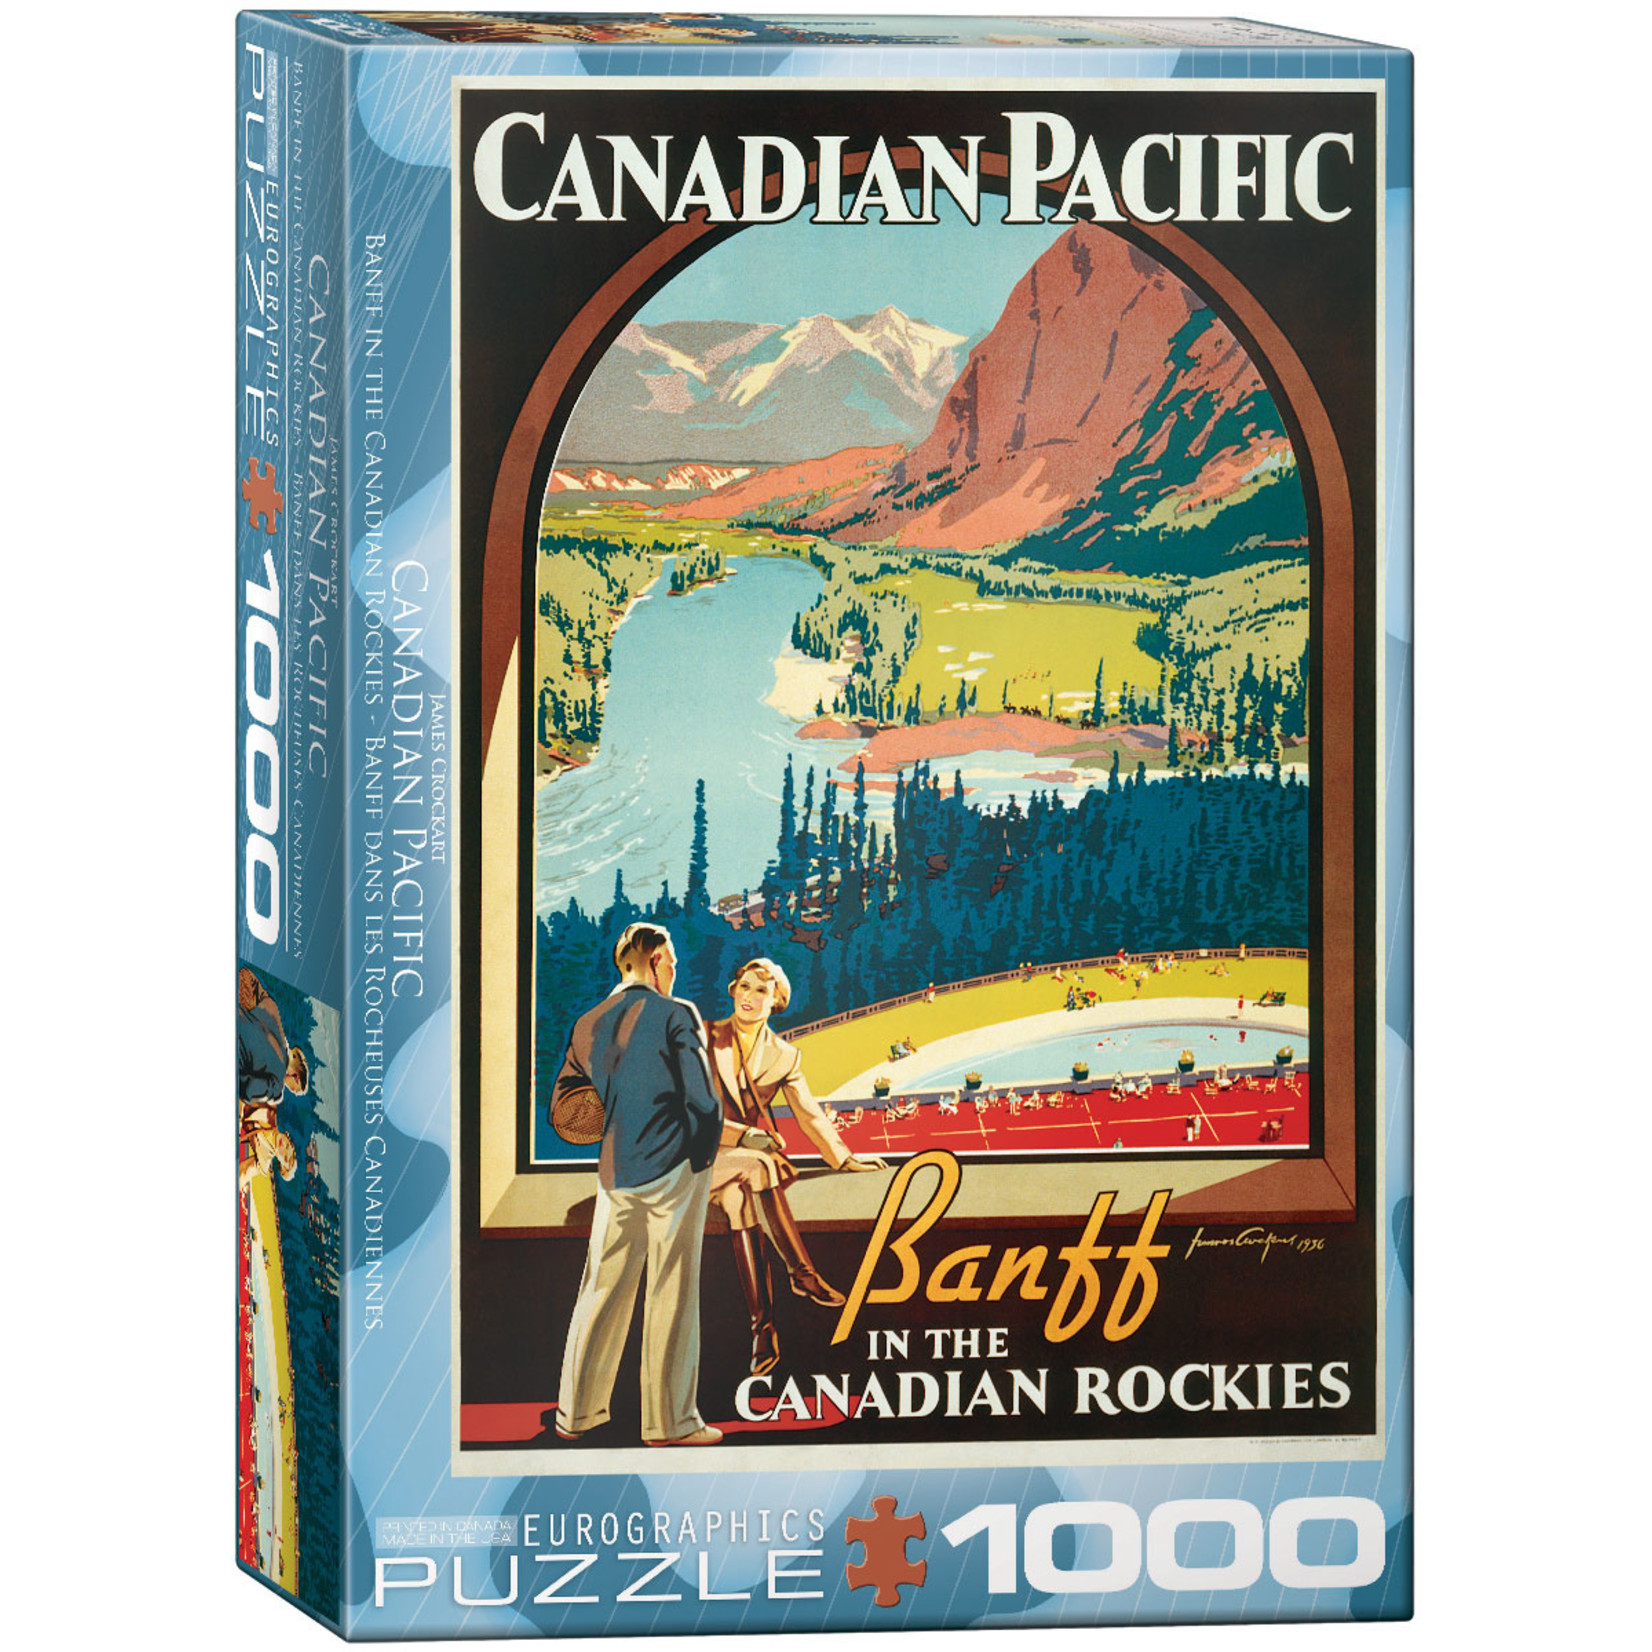 Puzzle - Banff in the Canadian Rockies